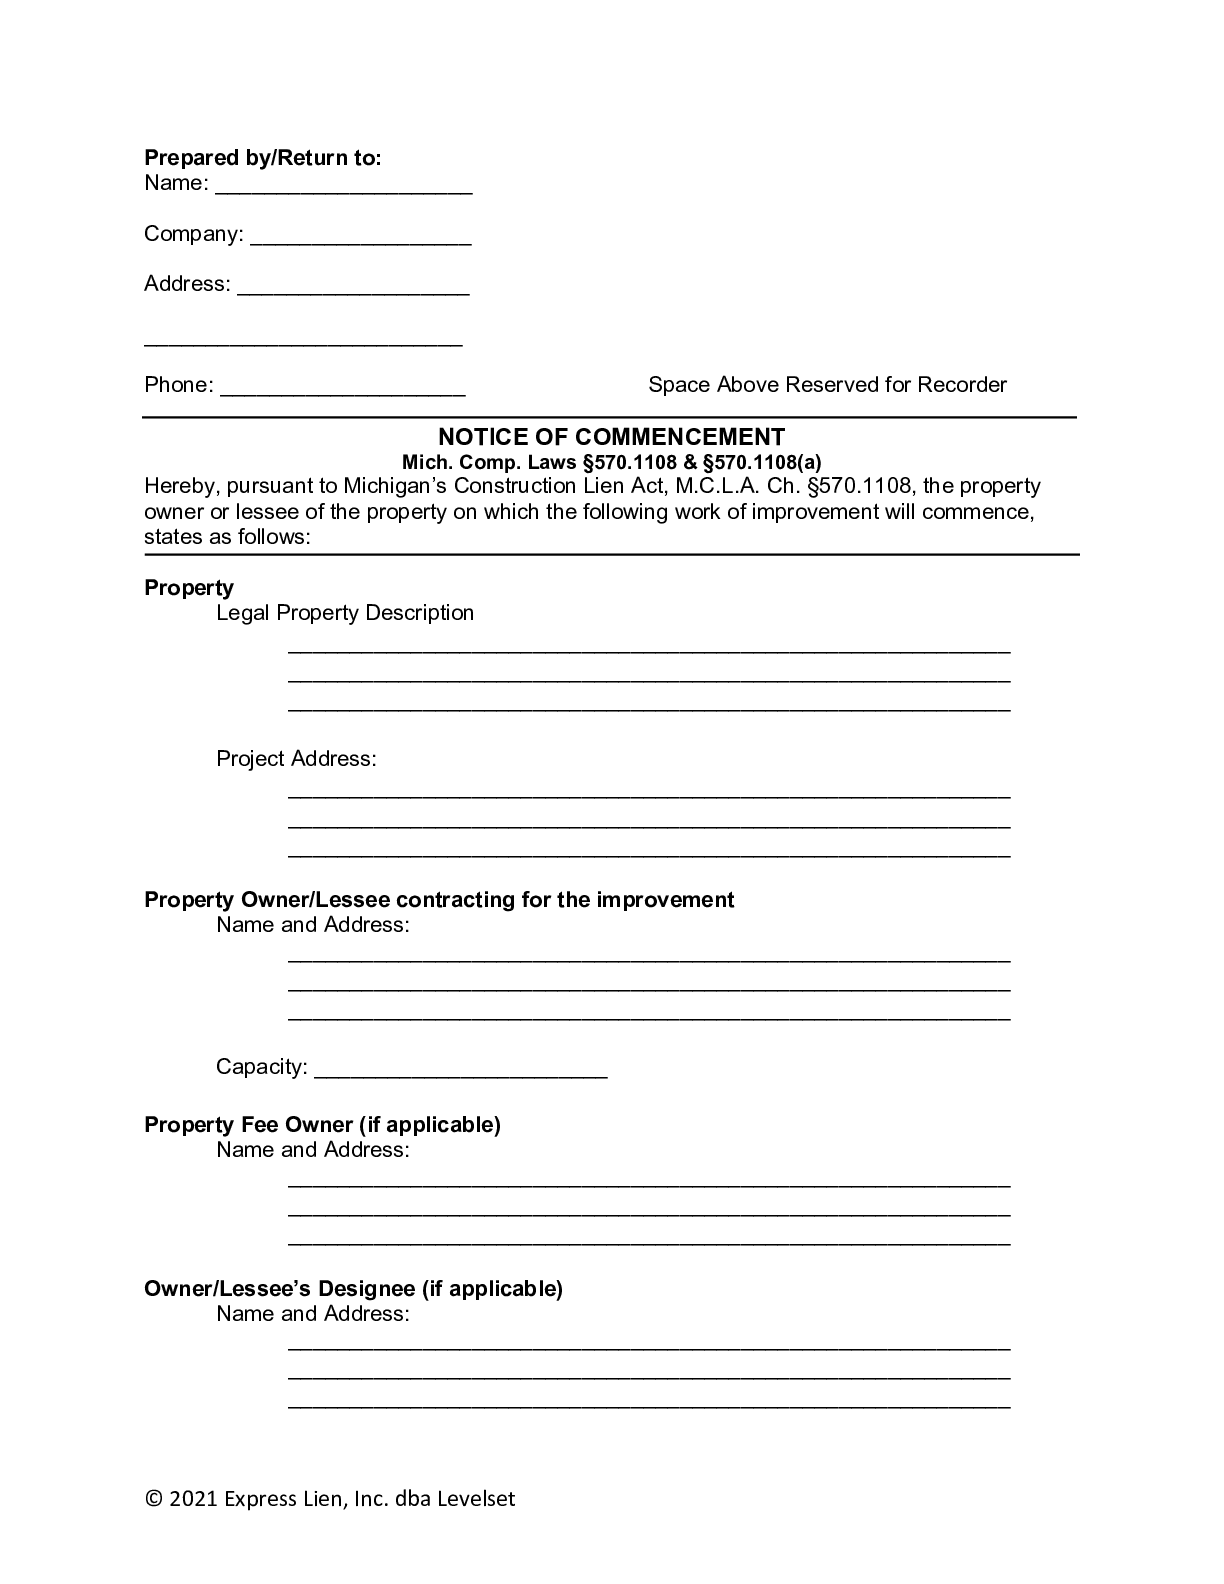 Michigan Notice of Commencement Form - free from